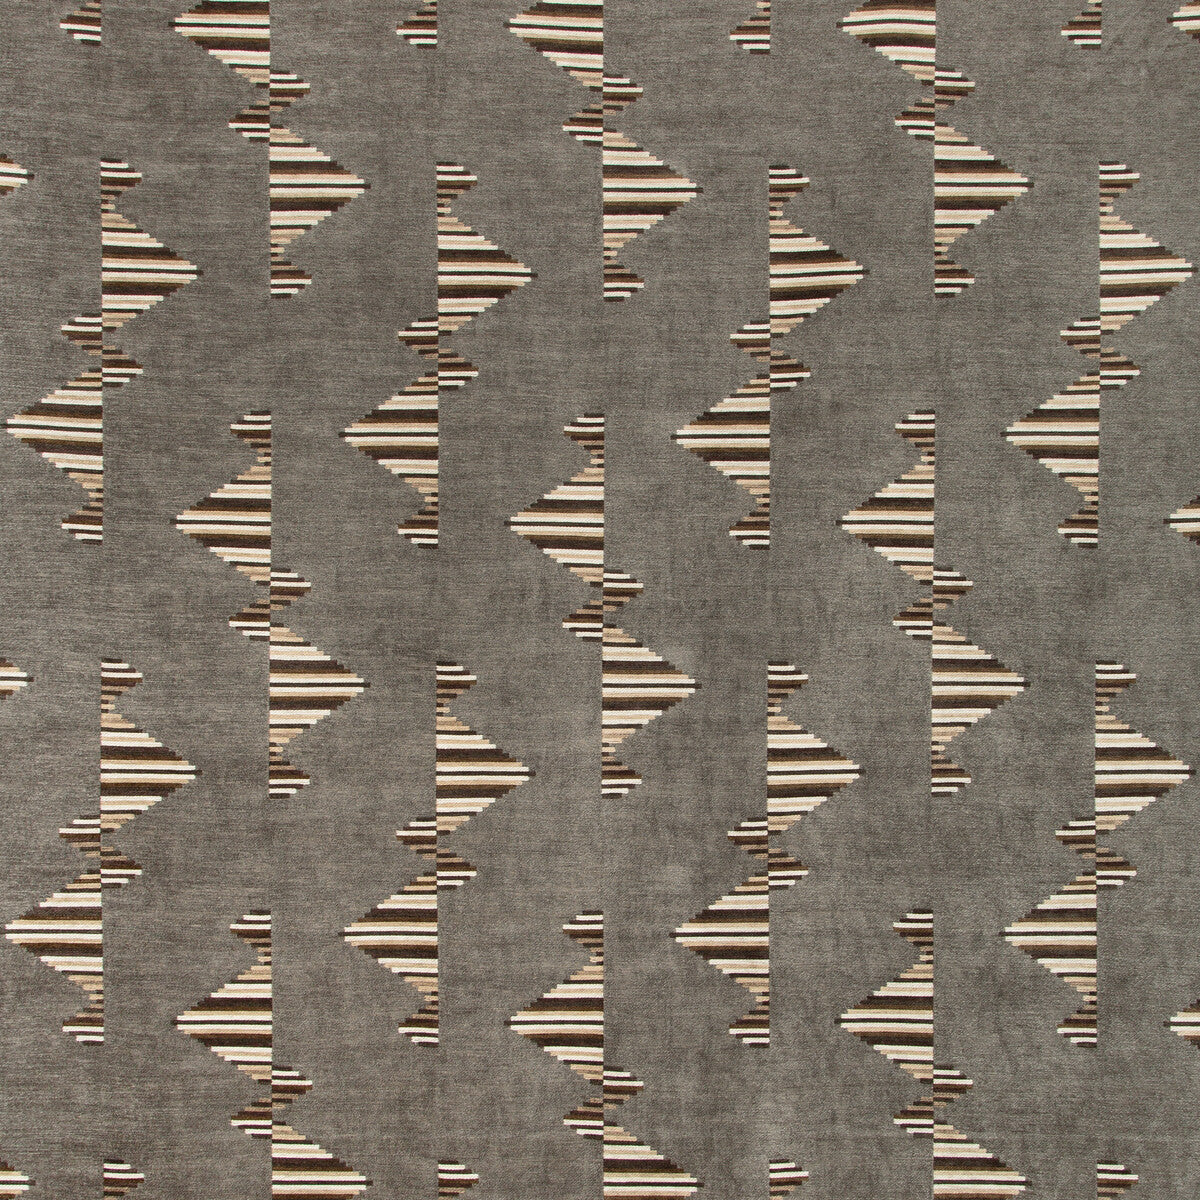 Arcade fabric in smoke color - pattern GWF-3758.216.0 - by Lee Jofa Modern in the Kelly Wearstler V collection